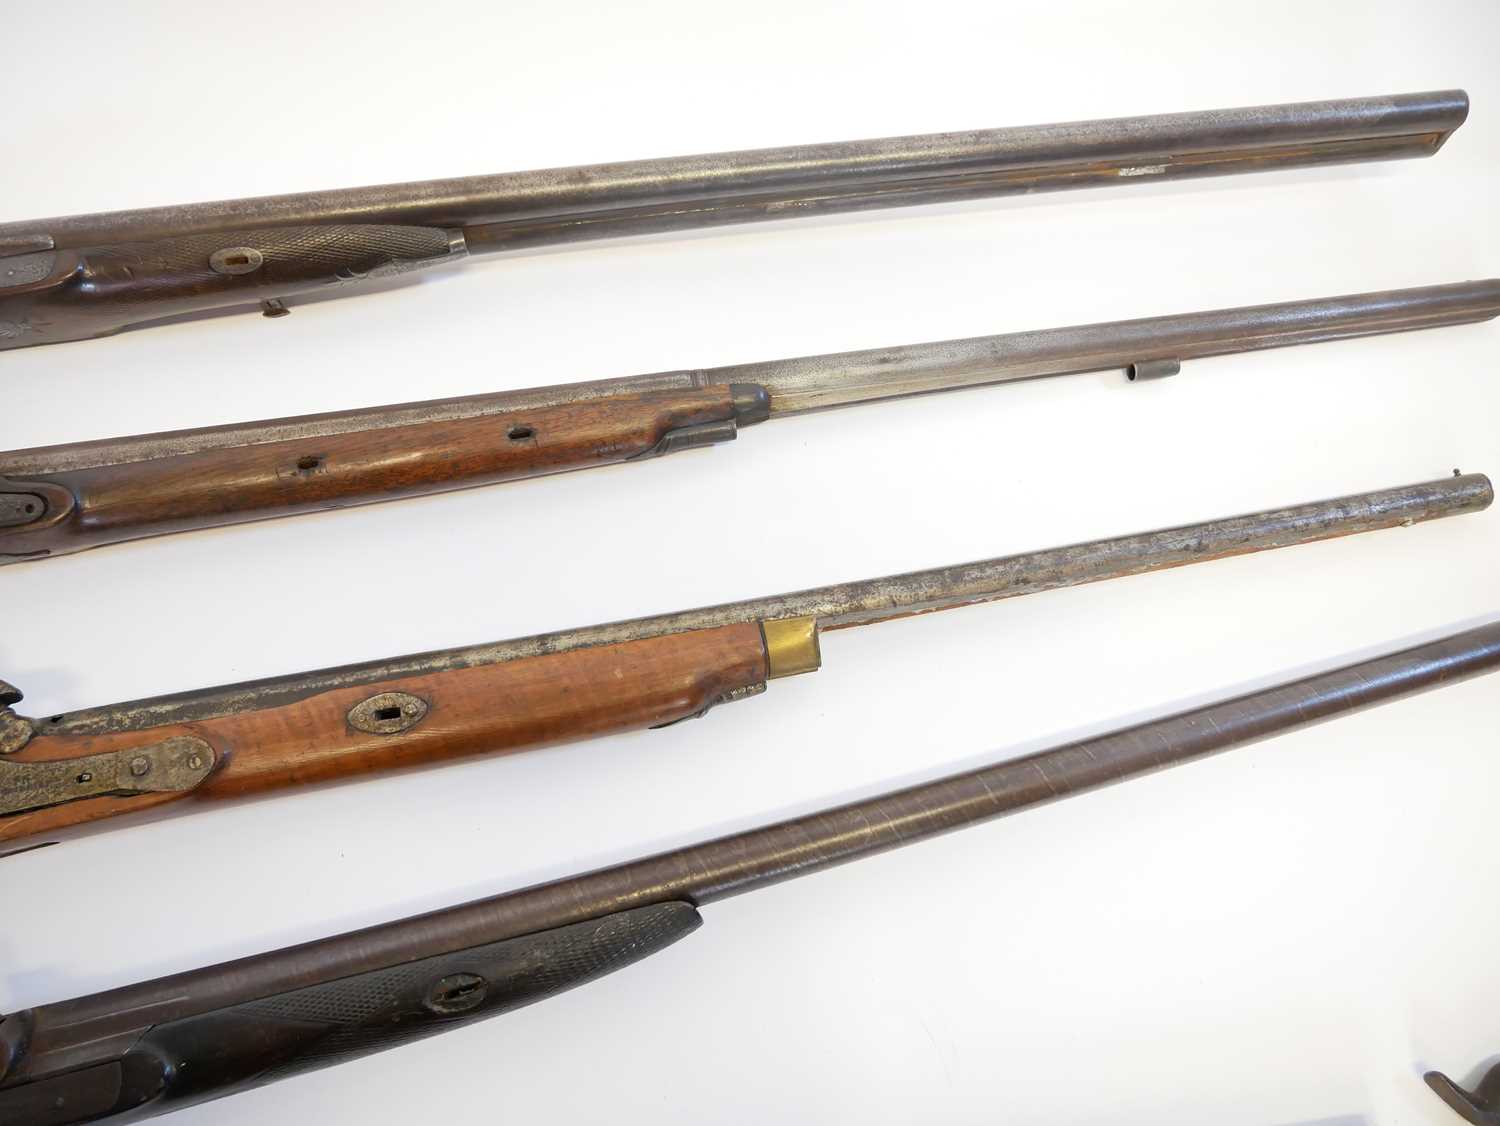 Four percussion shotguns for restoration, one a double barrel, the other three single barrels one by - Image 9 of 21